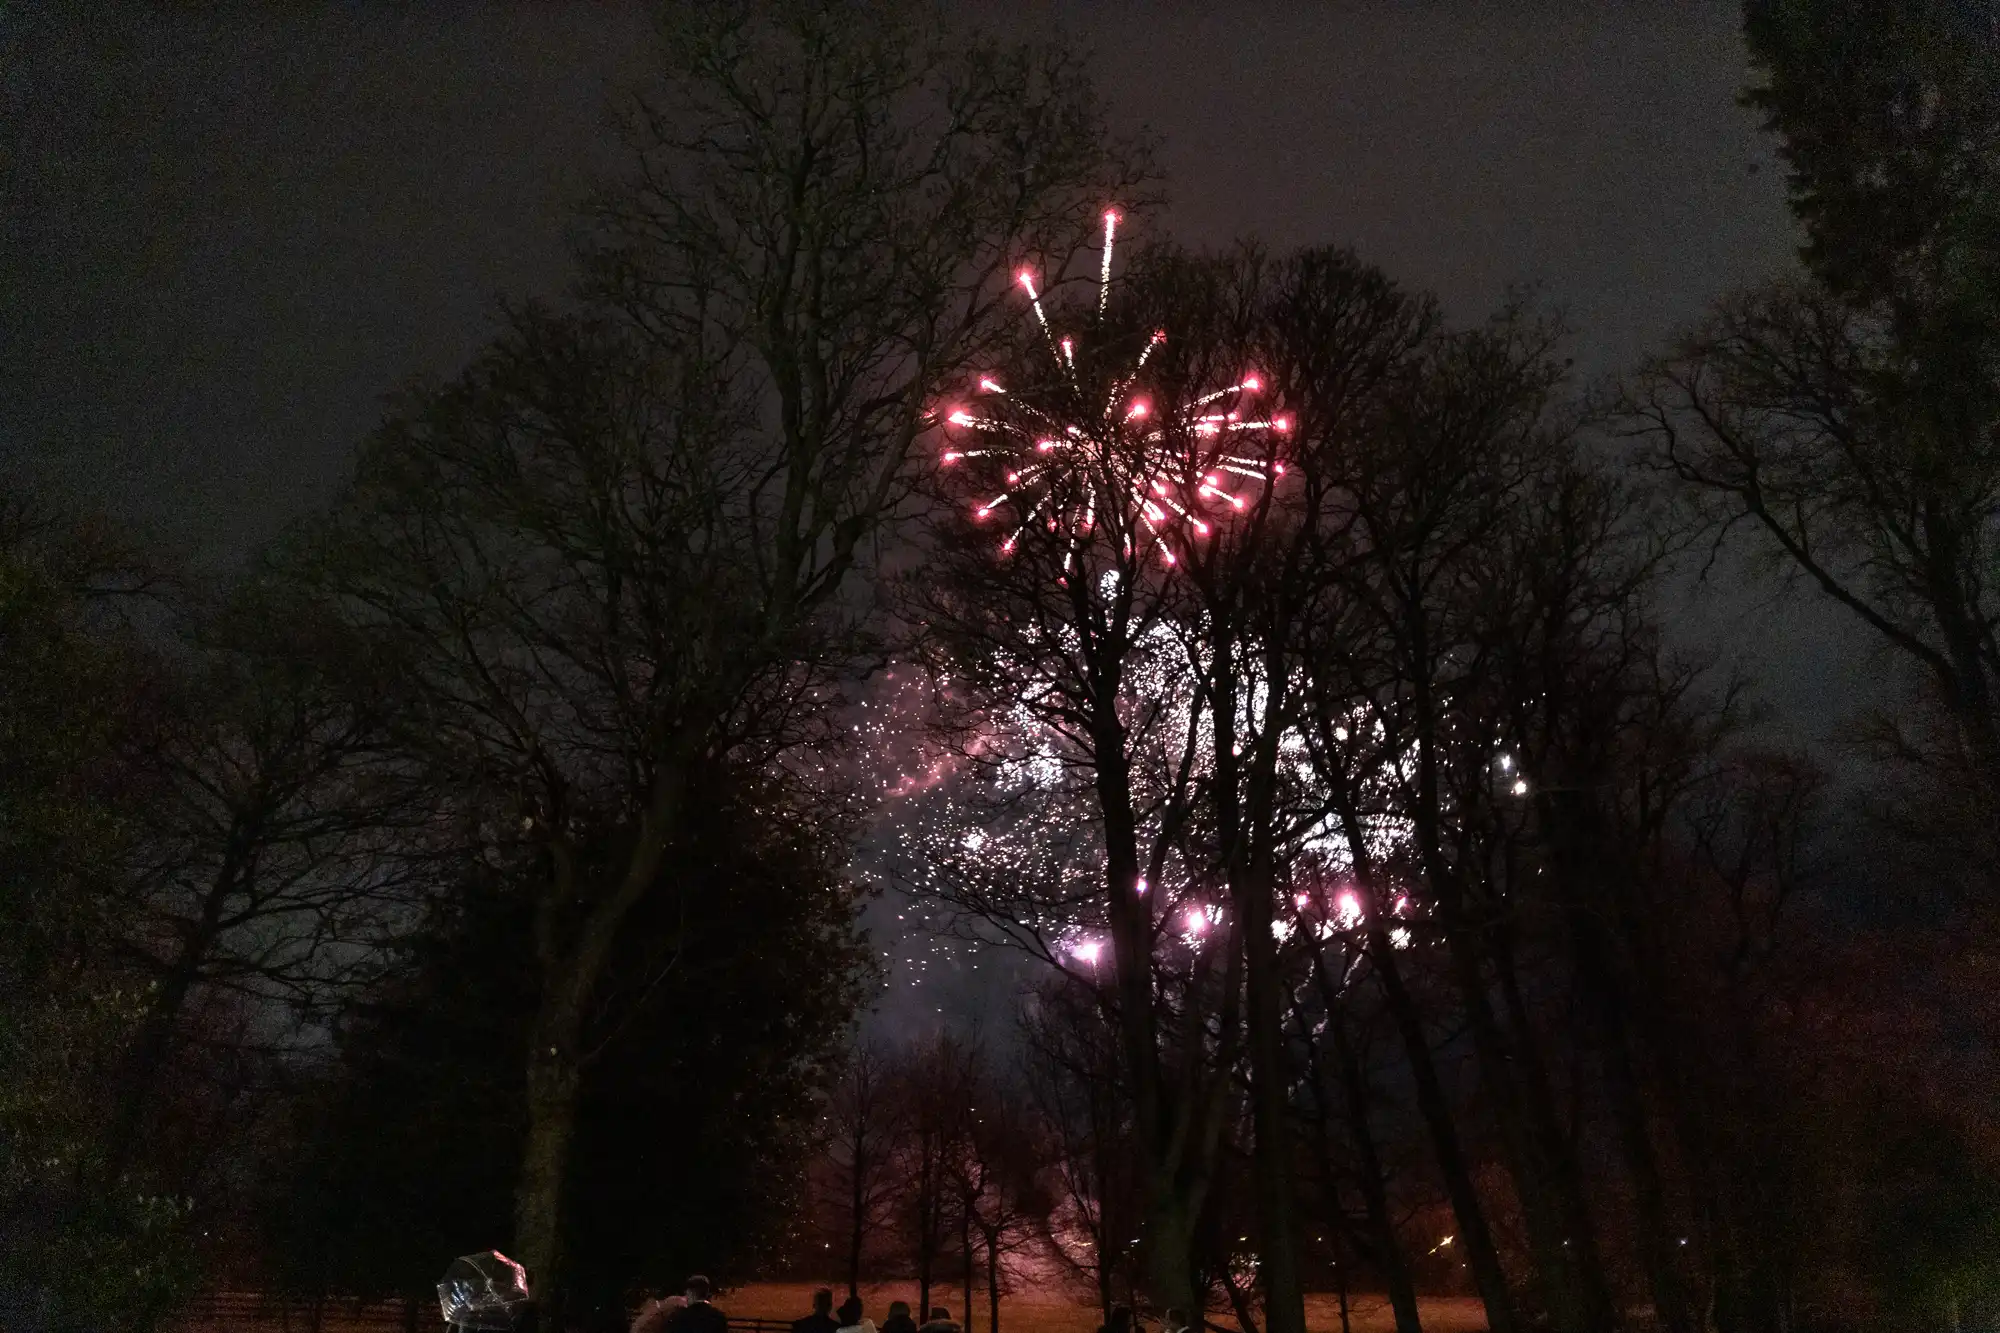 Fireworks burst in a night sky, visible through the silhouettes of bare trees, with a few onlookers watching from the ground below.